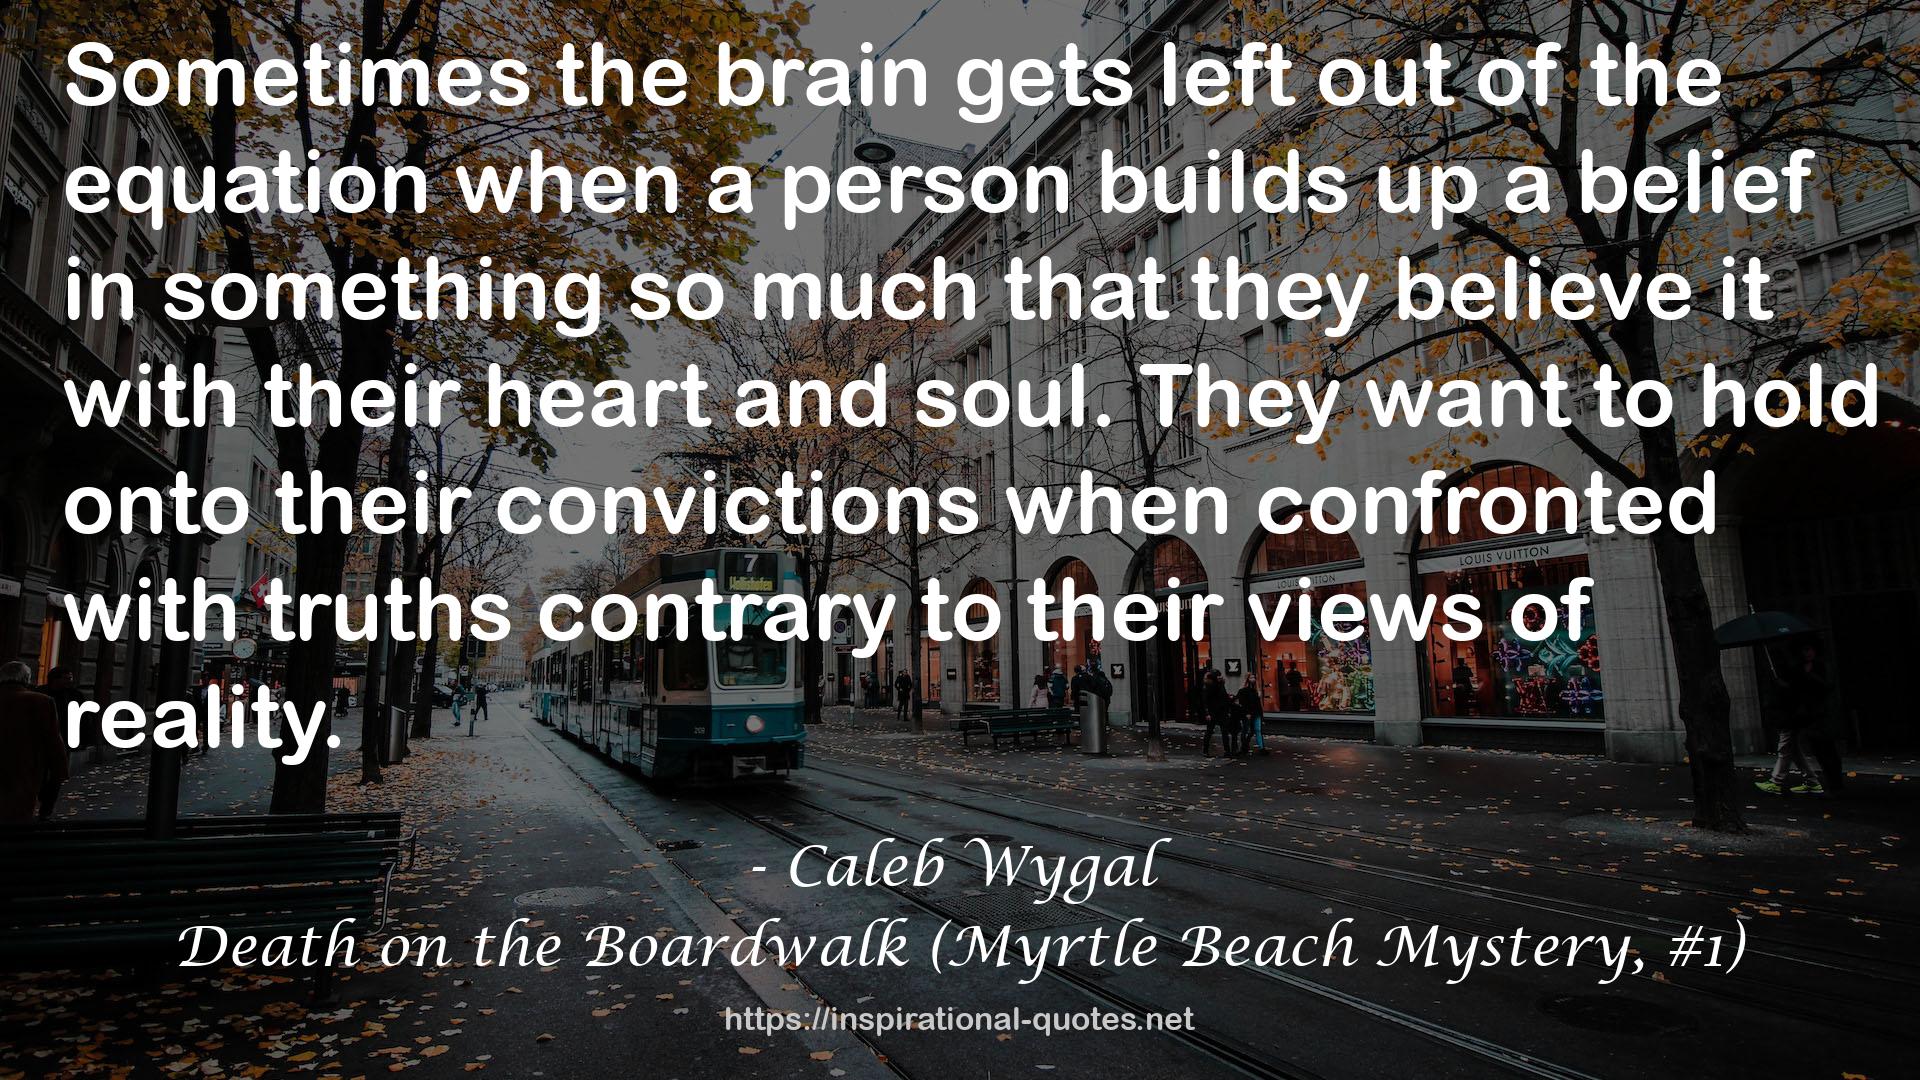 Death on the Boardwalk (Myrtle Beach Mystery, #1) QUOTES